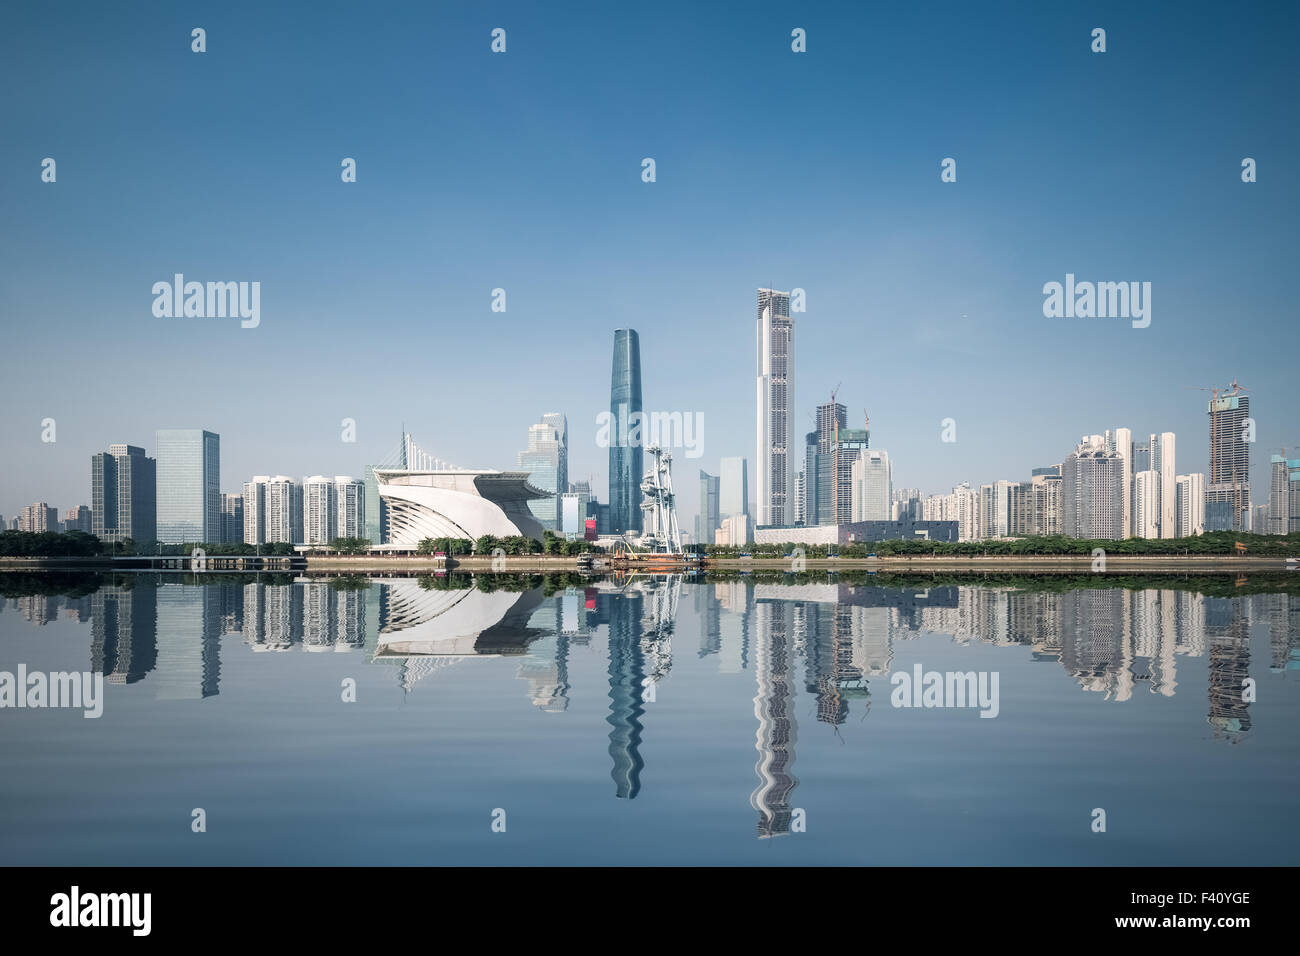 city skyline and reflection in guangzhou Stock Photo